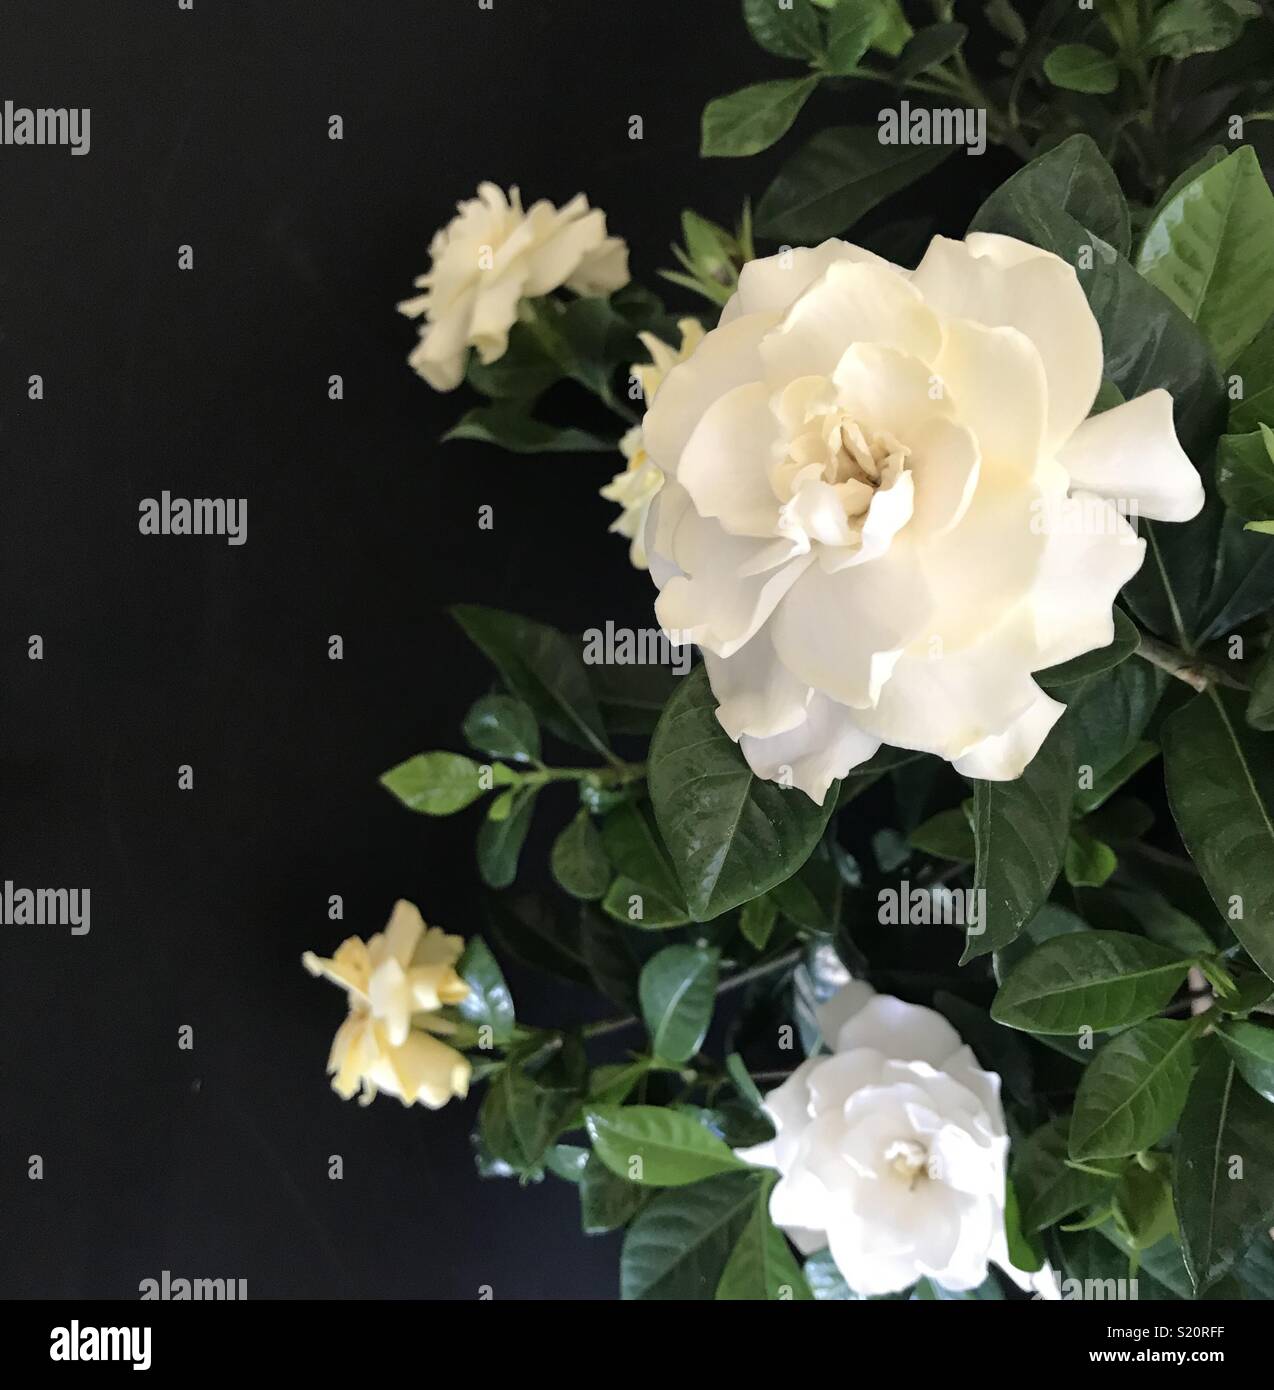 A blooming Gardenia plant Stock Photo